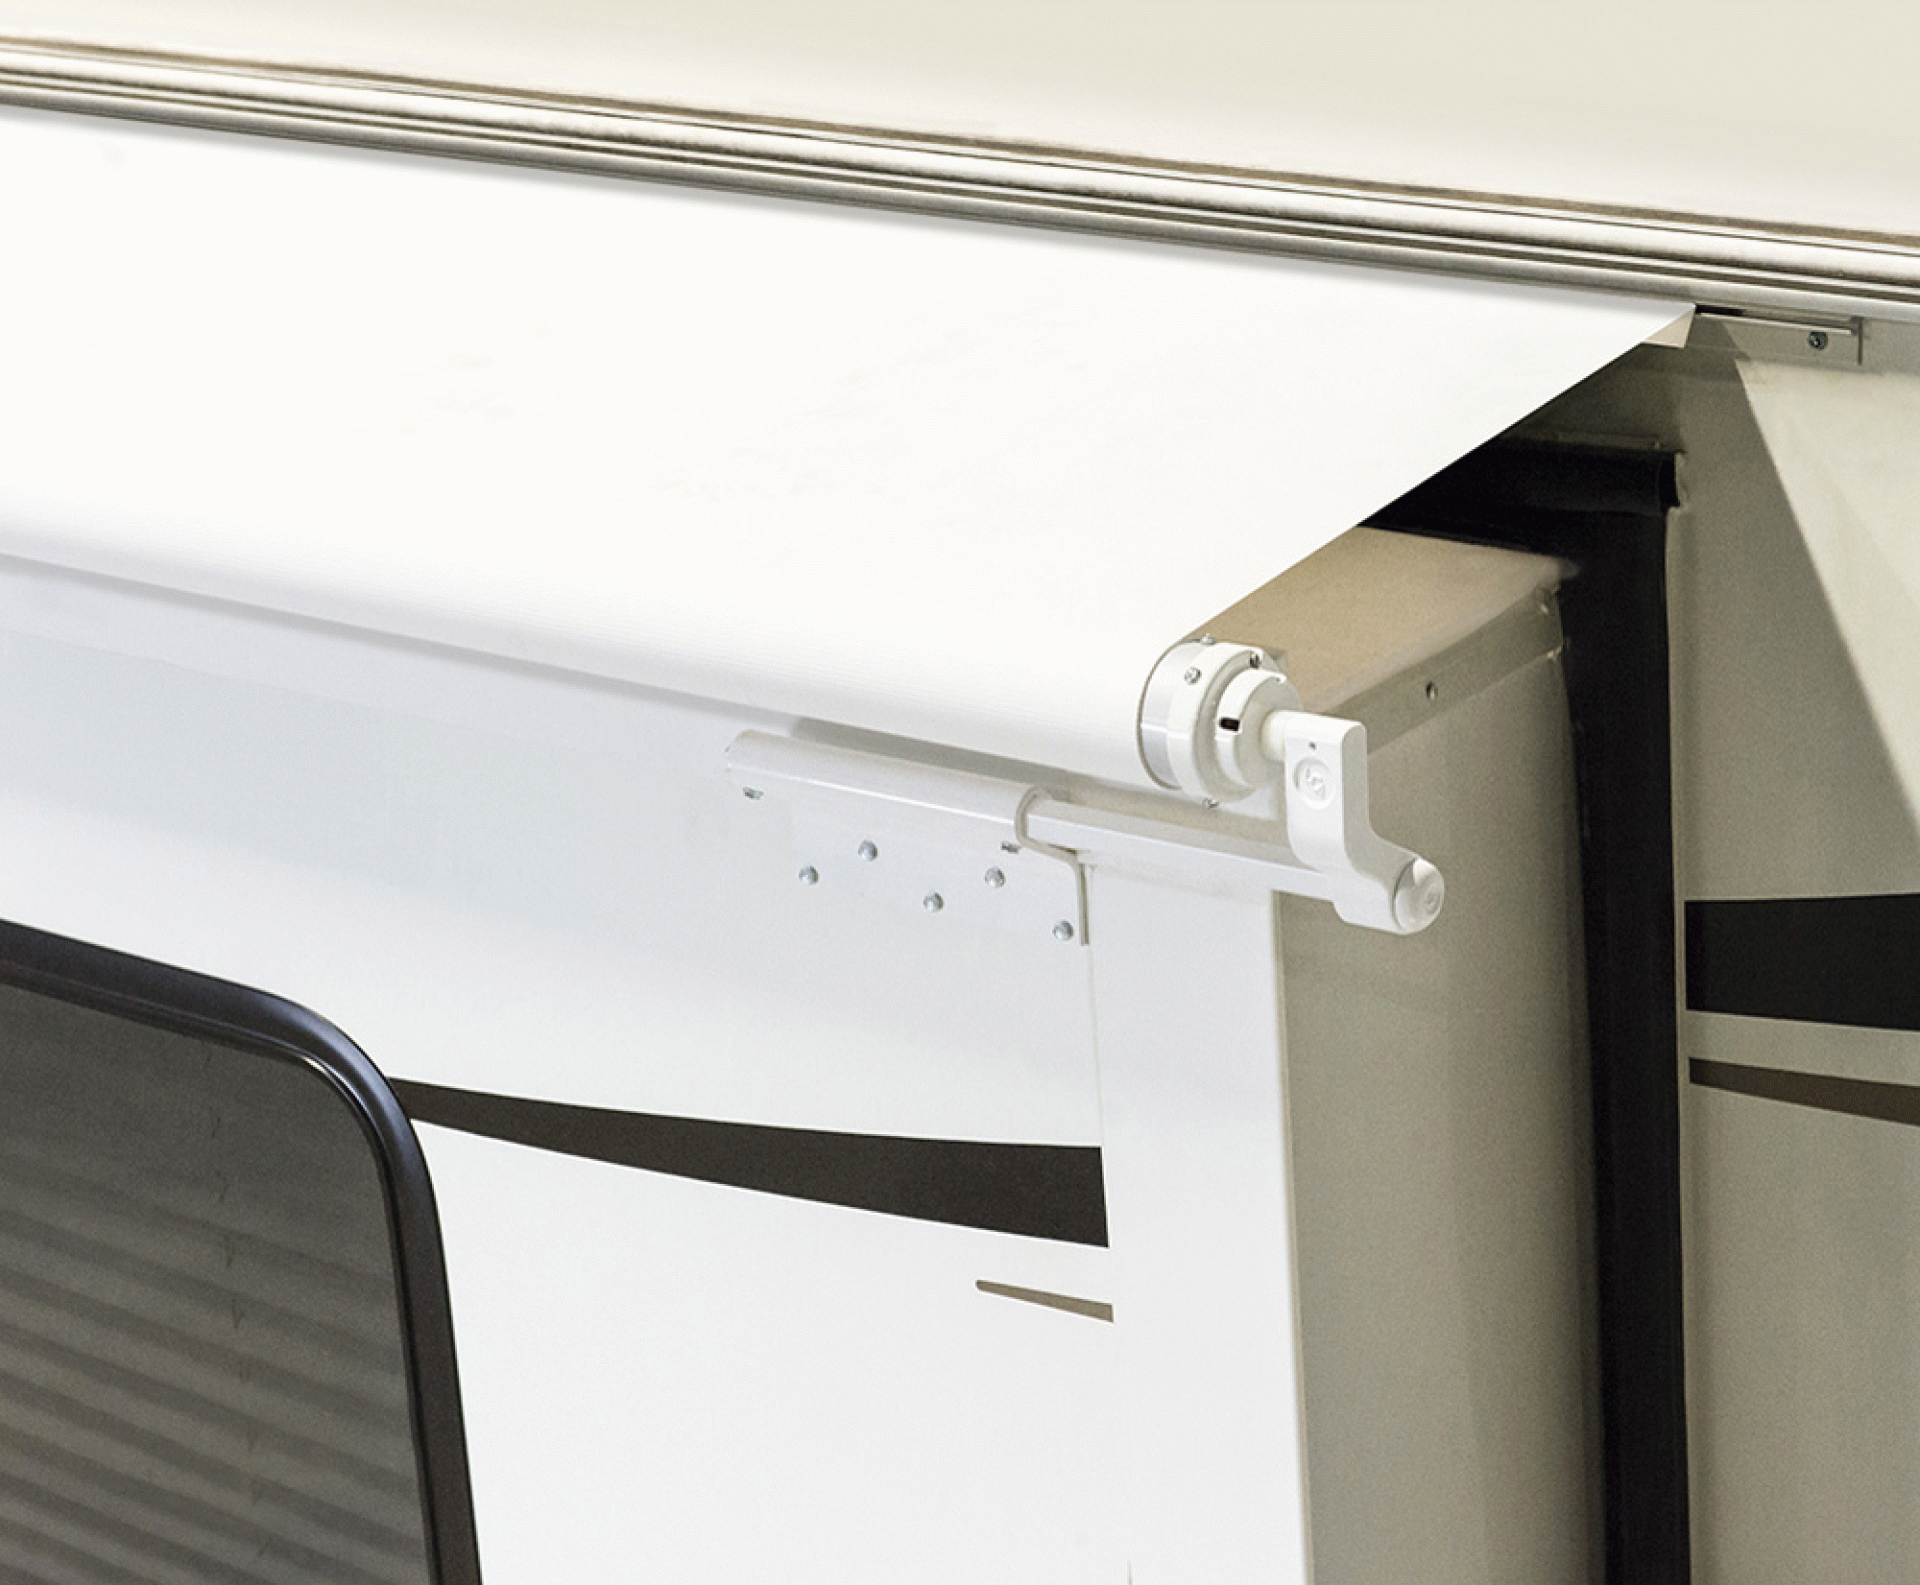 Lippert Components | V000163299 | SOLERA SLIDE OUT AWNING 156" FITS ROOM WIDTH 146" TO 151 3/4" WHITE VINYL WHITE HARDWARE